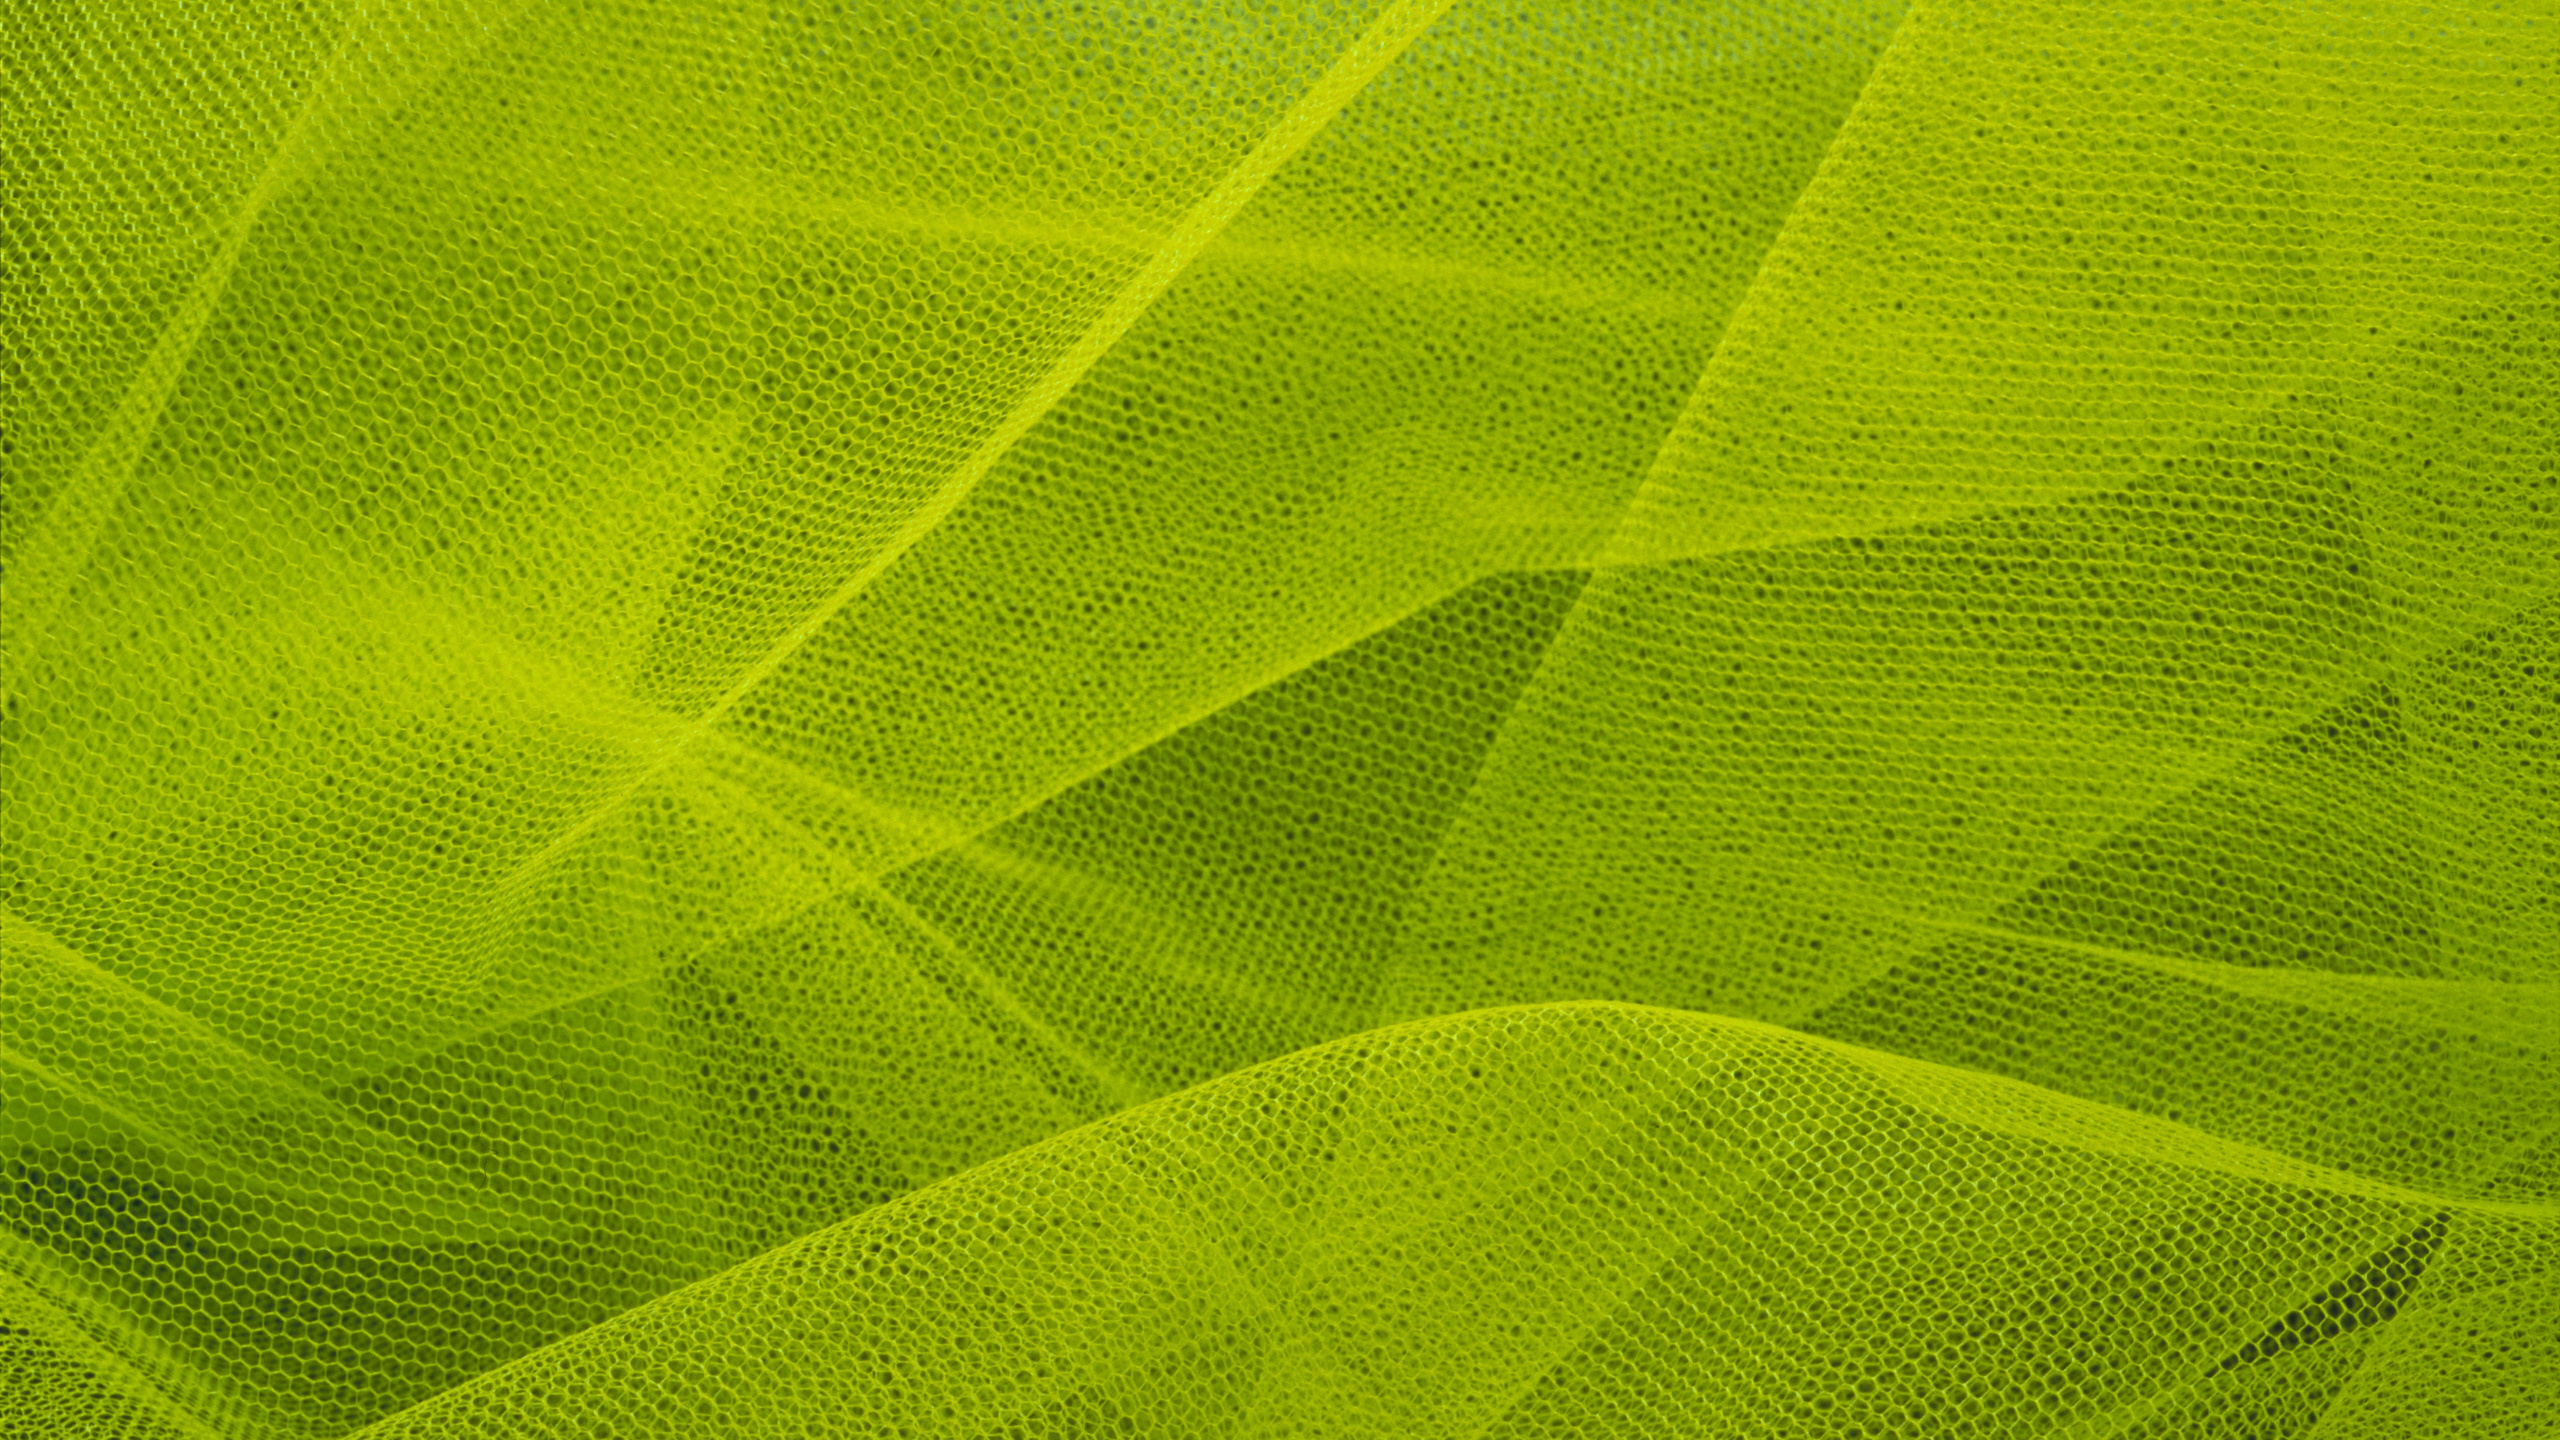 Green and White Polka Dot Textile. Wallpaper in 2560x1440 Resolution